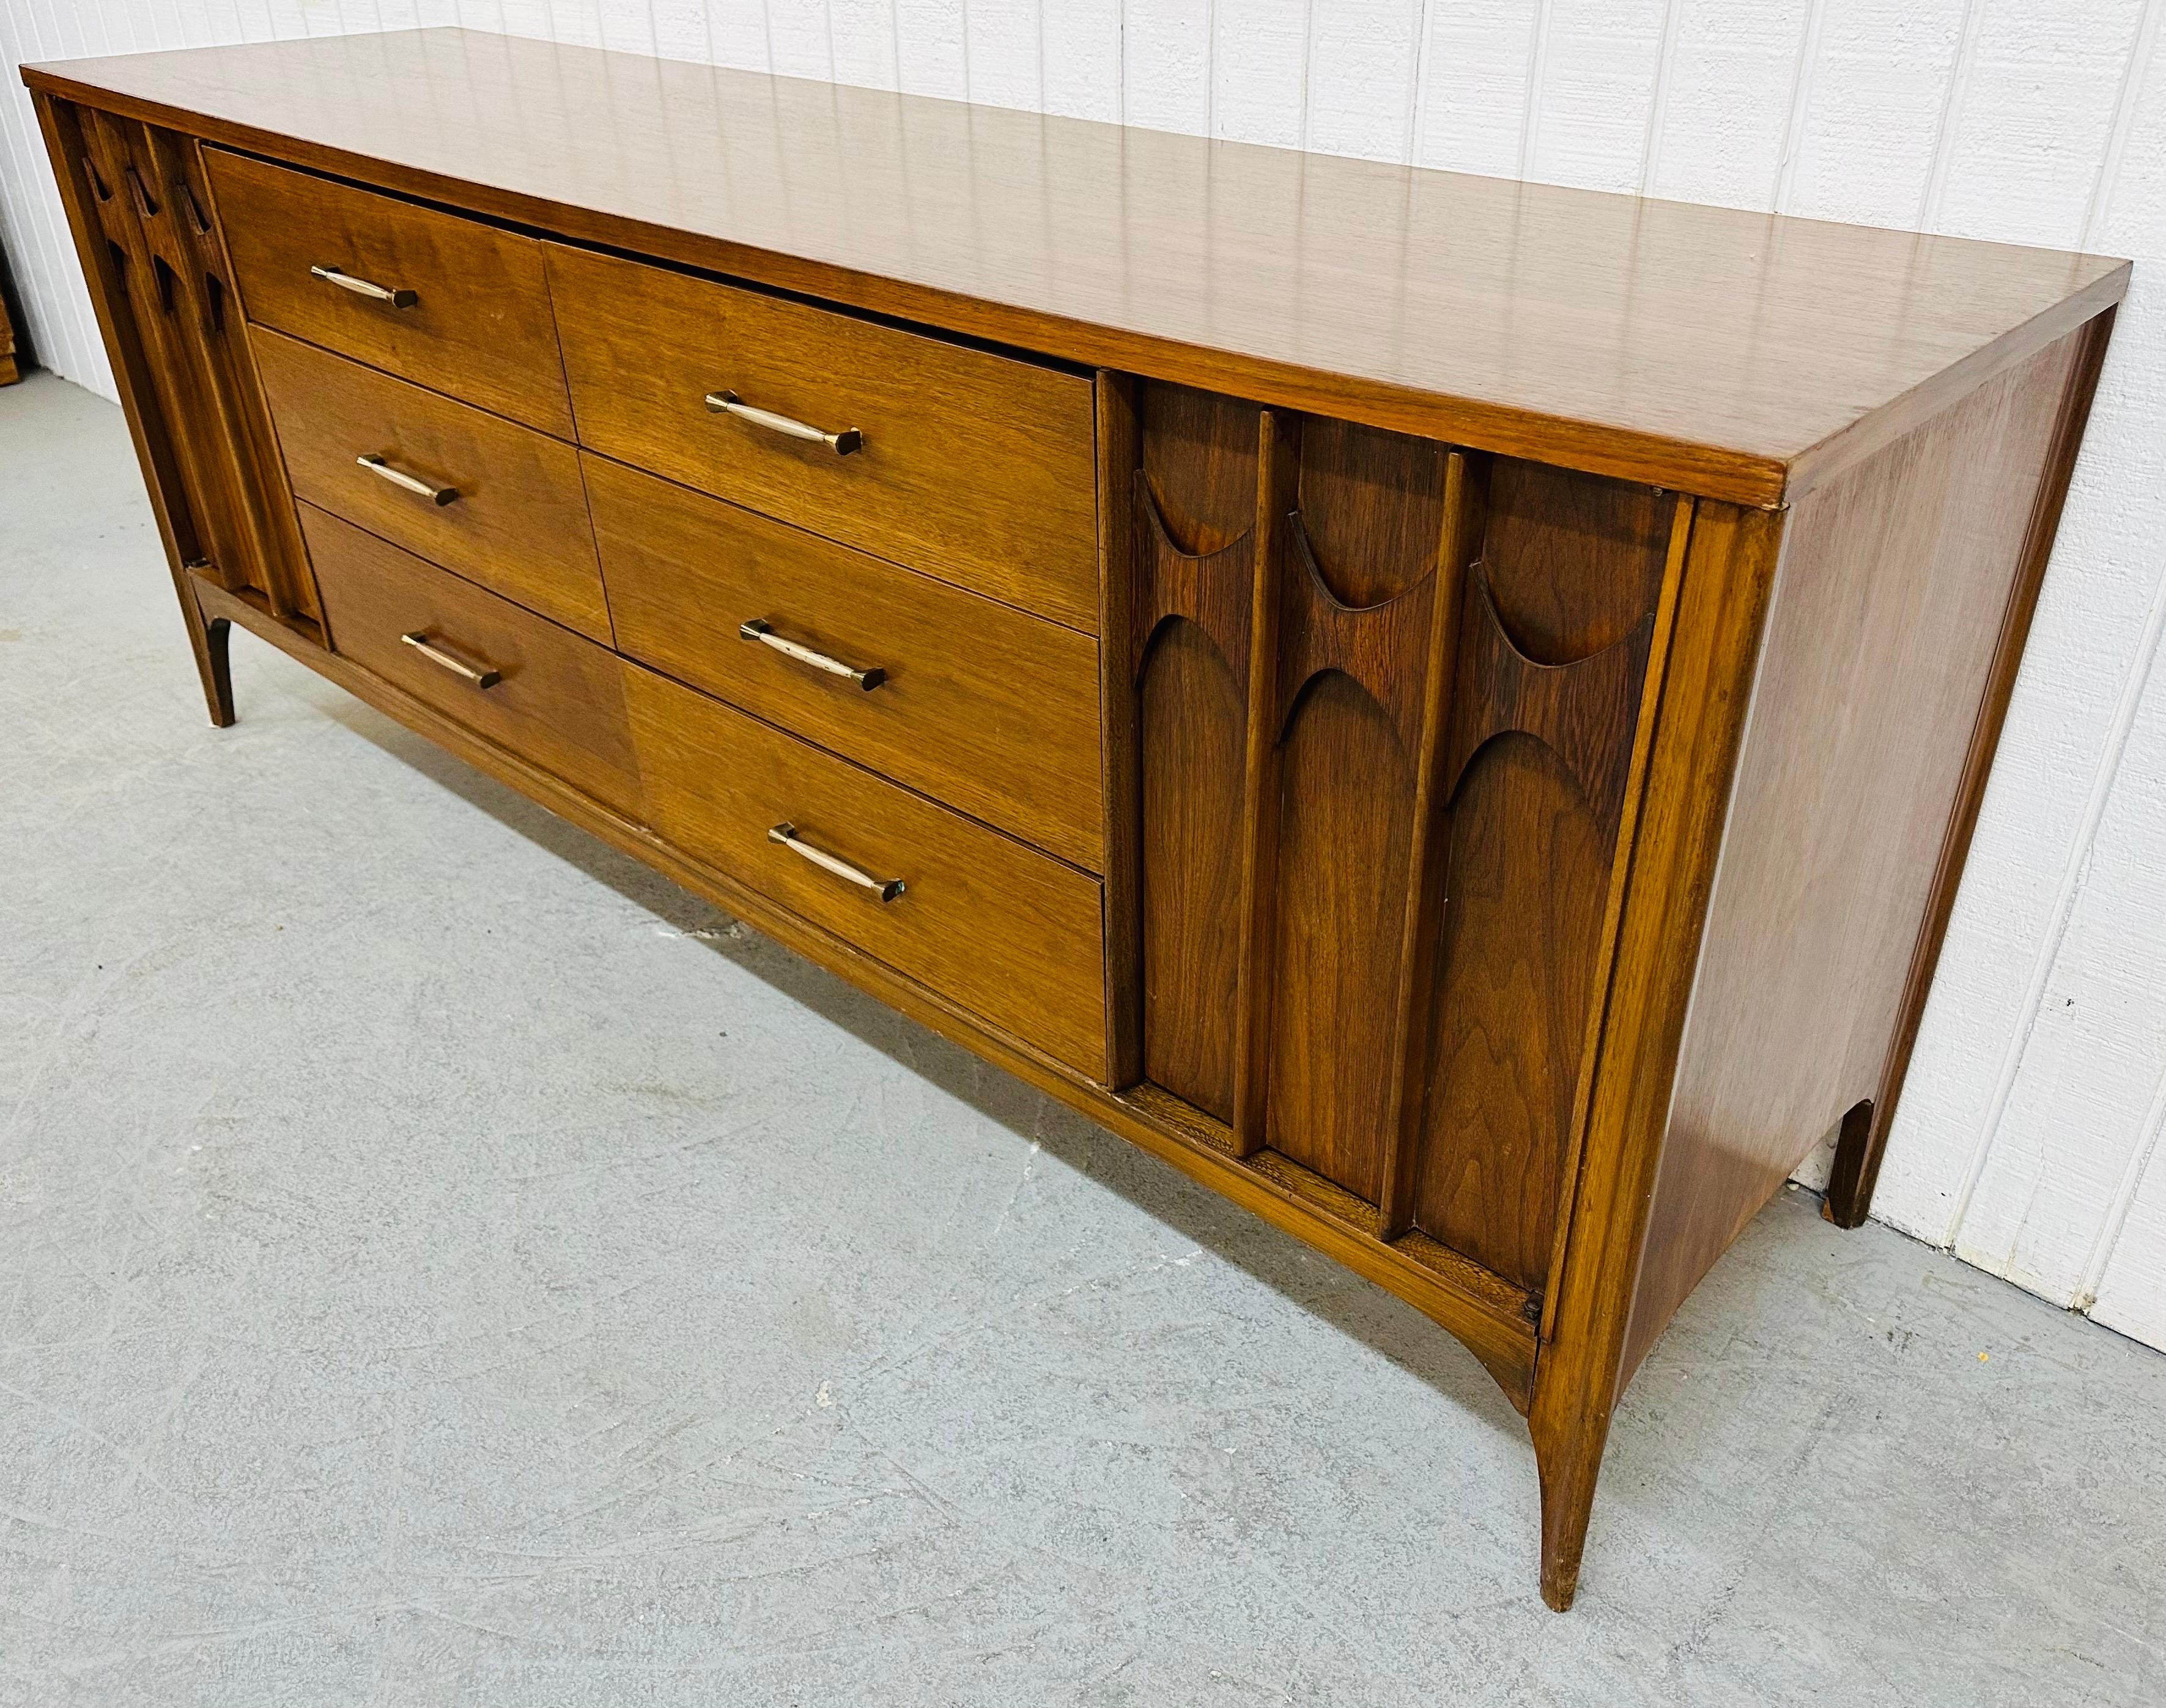 This listing is for a Mid-Century Modern Kent Coffey Perspecta Walnut 12-Drawer Dresser. Featuring doors on each side with sculpted rosewood pulls that open up to three hidden drawers, six larger drawers in the center with original hardware, and a